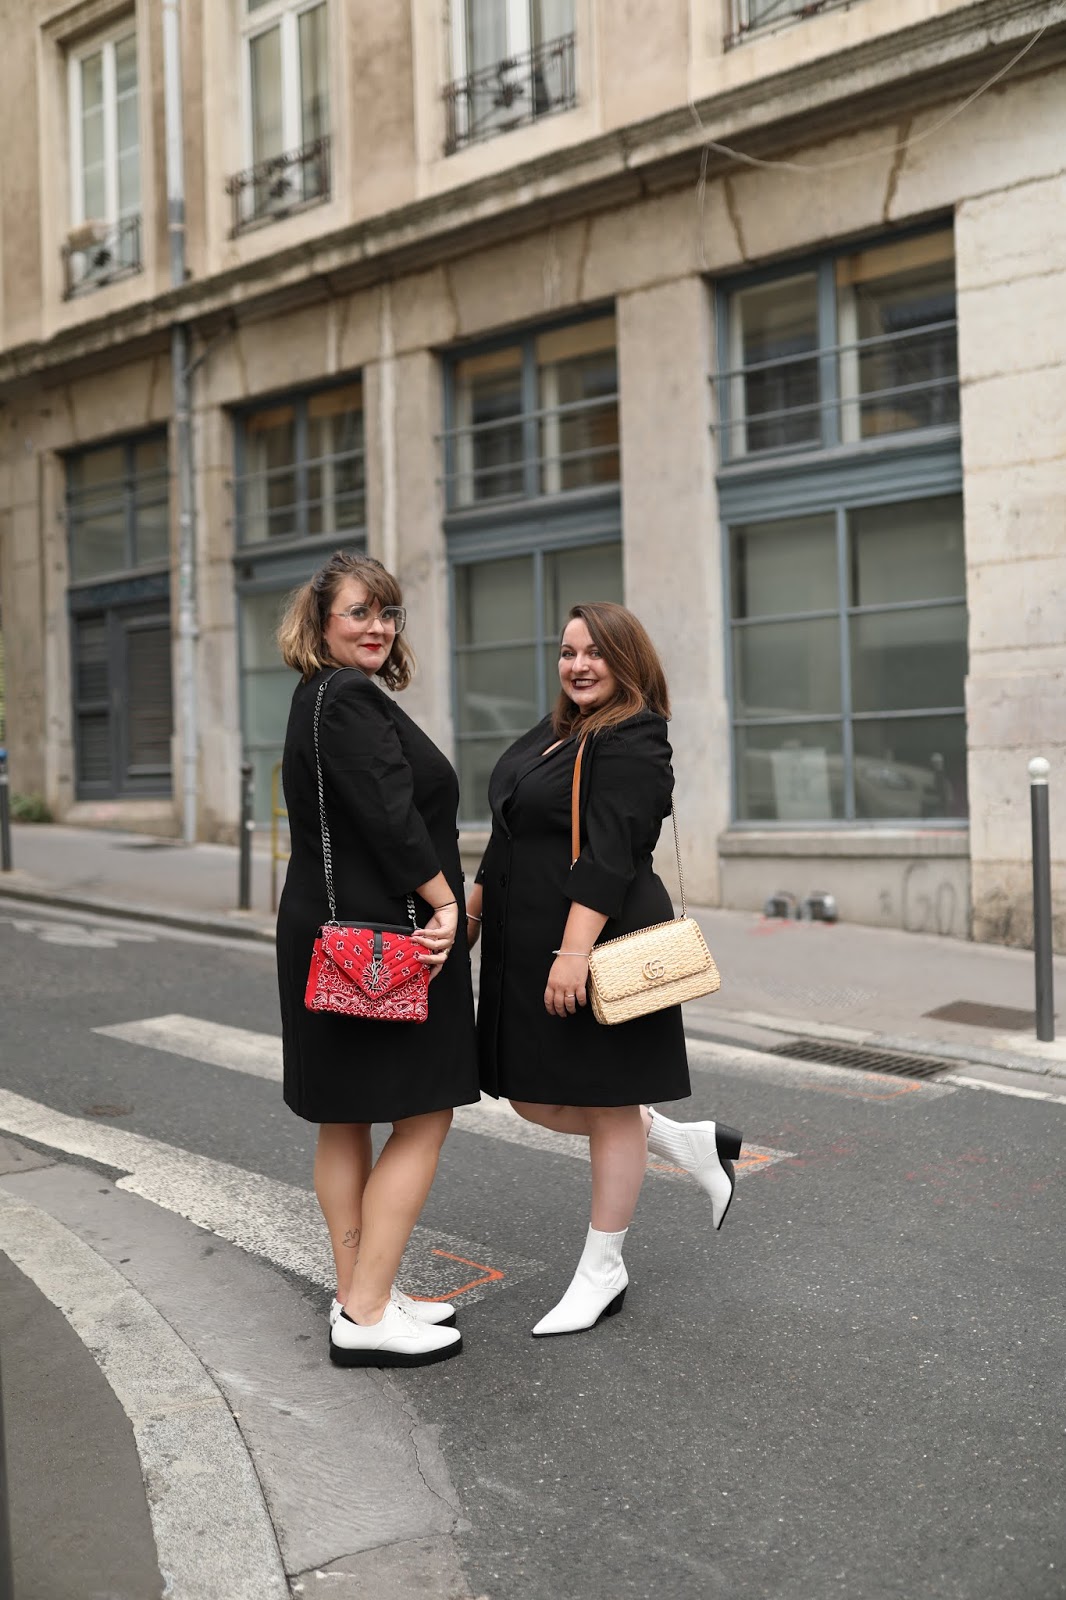 grande taille, blog, plus size, french blogger, lyon, mode, fashion, plus fashion, outfit, grande taille, mode, Lyon, look, plus size, bodypositive, french blogger, curves, loveyourself curvy gang